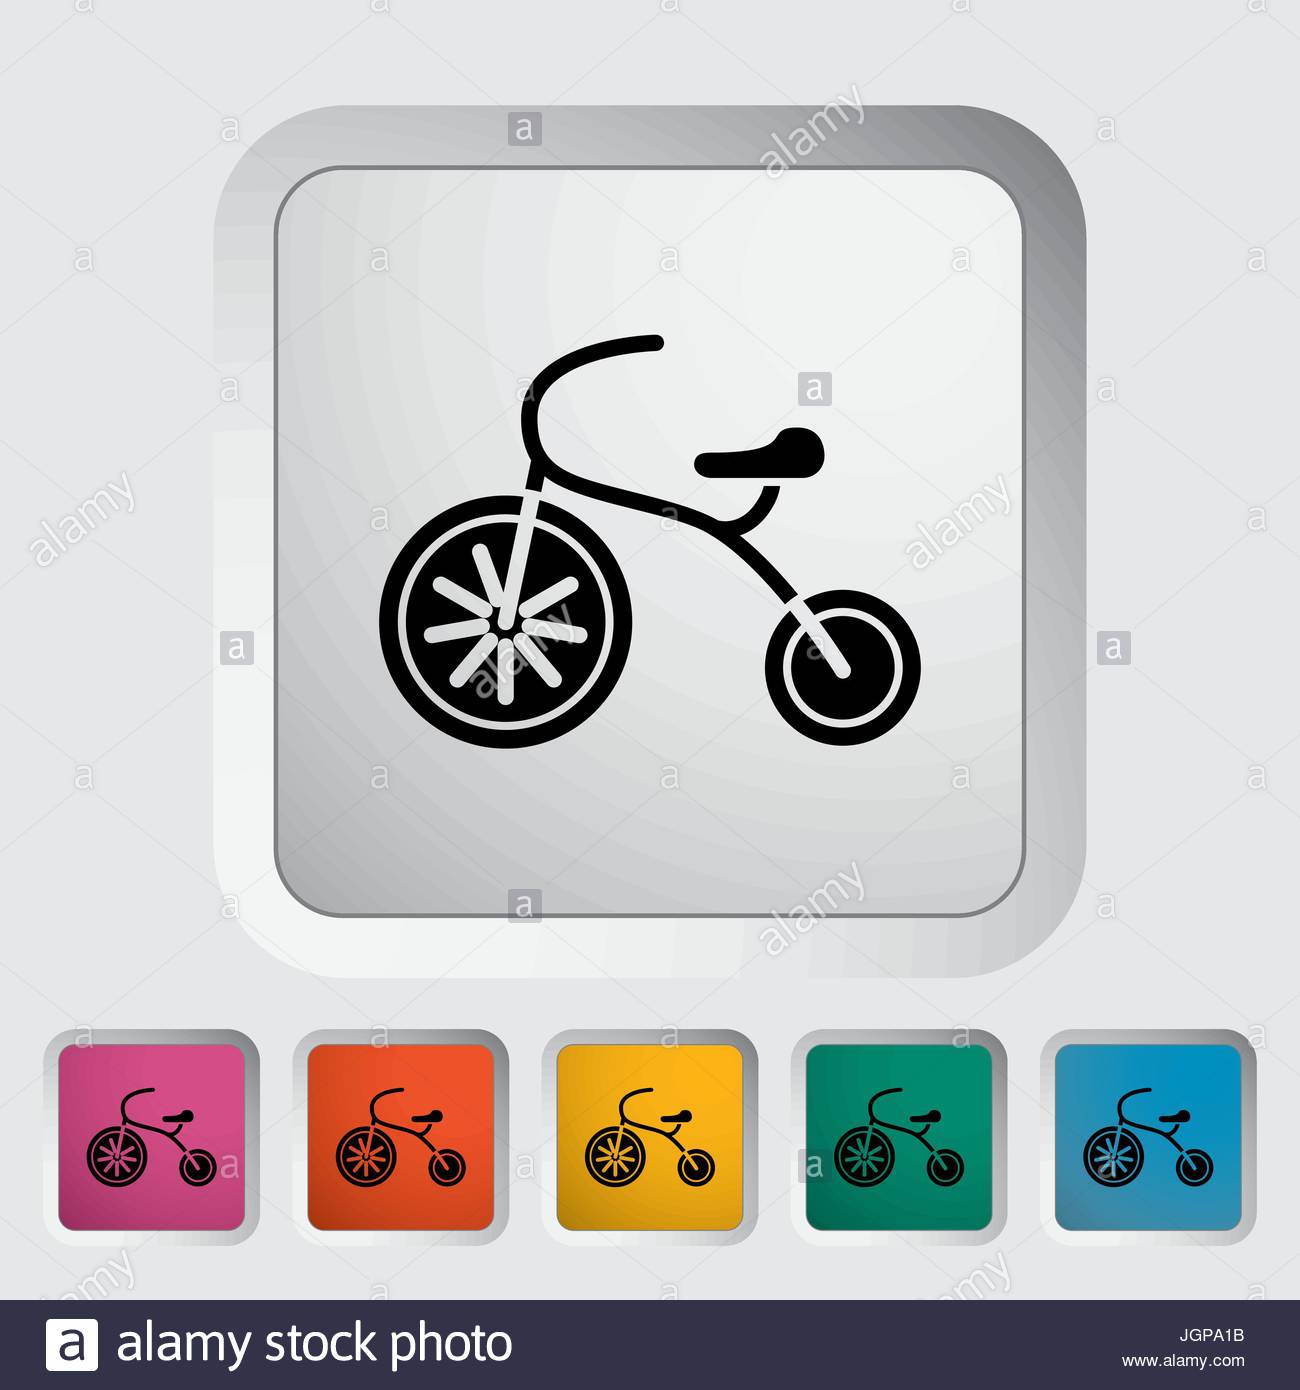 Baby, newborn, raw, simple, tricycle icon | Icon search engine